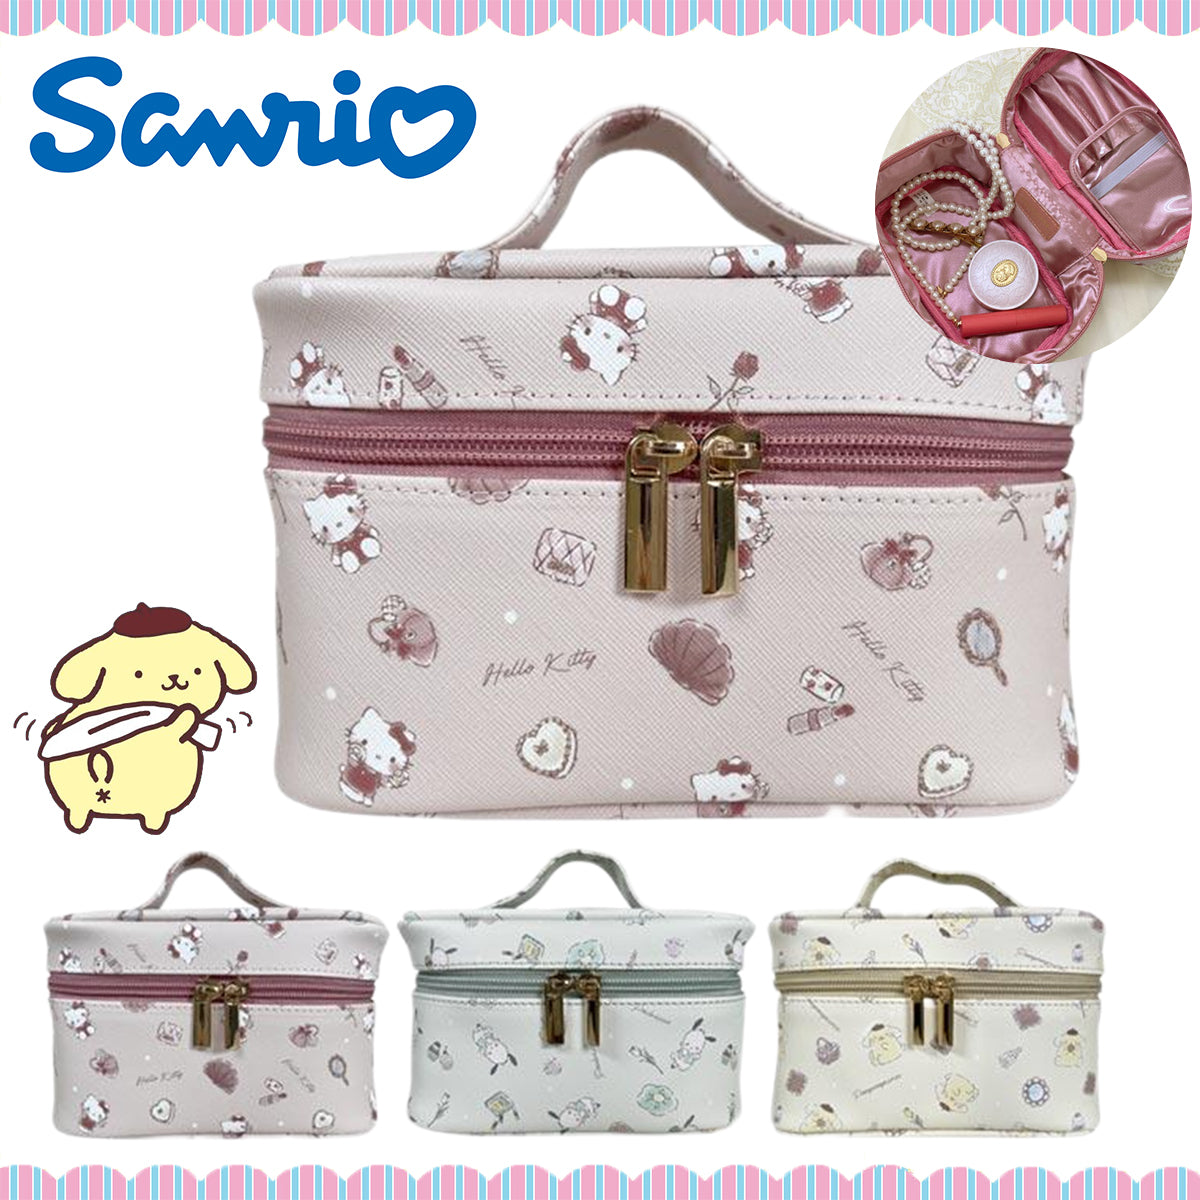 Make Up Case - Sanrio Characters (Japan Edition)